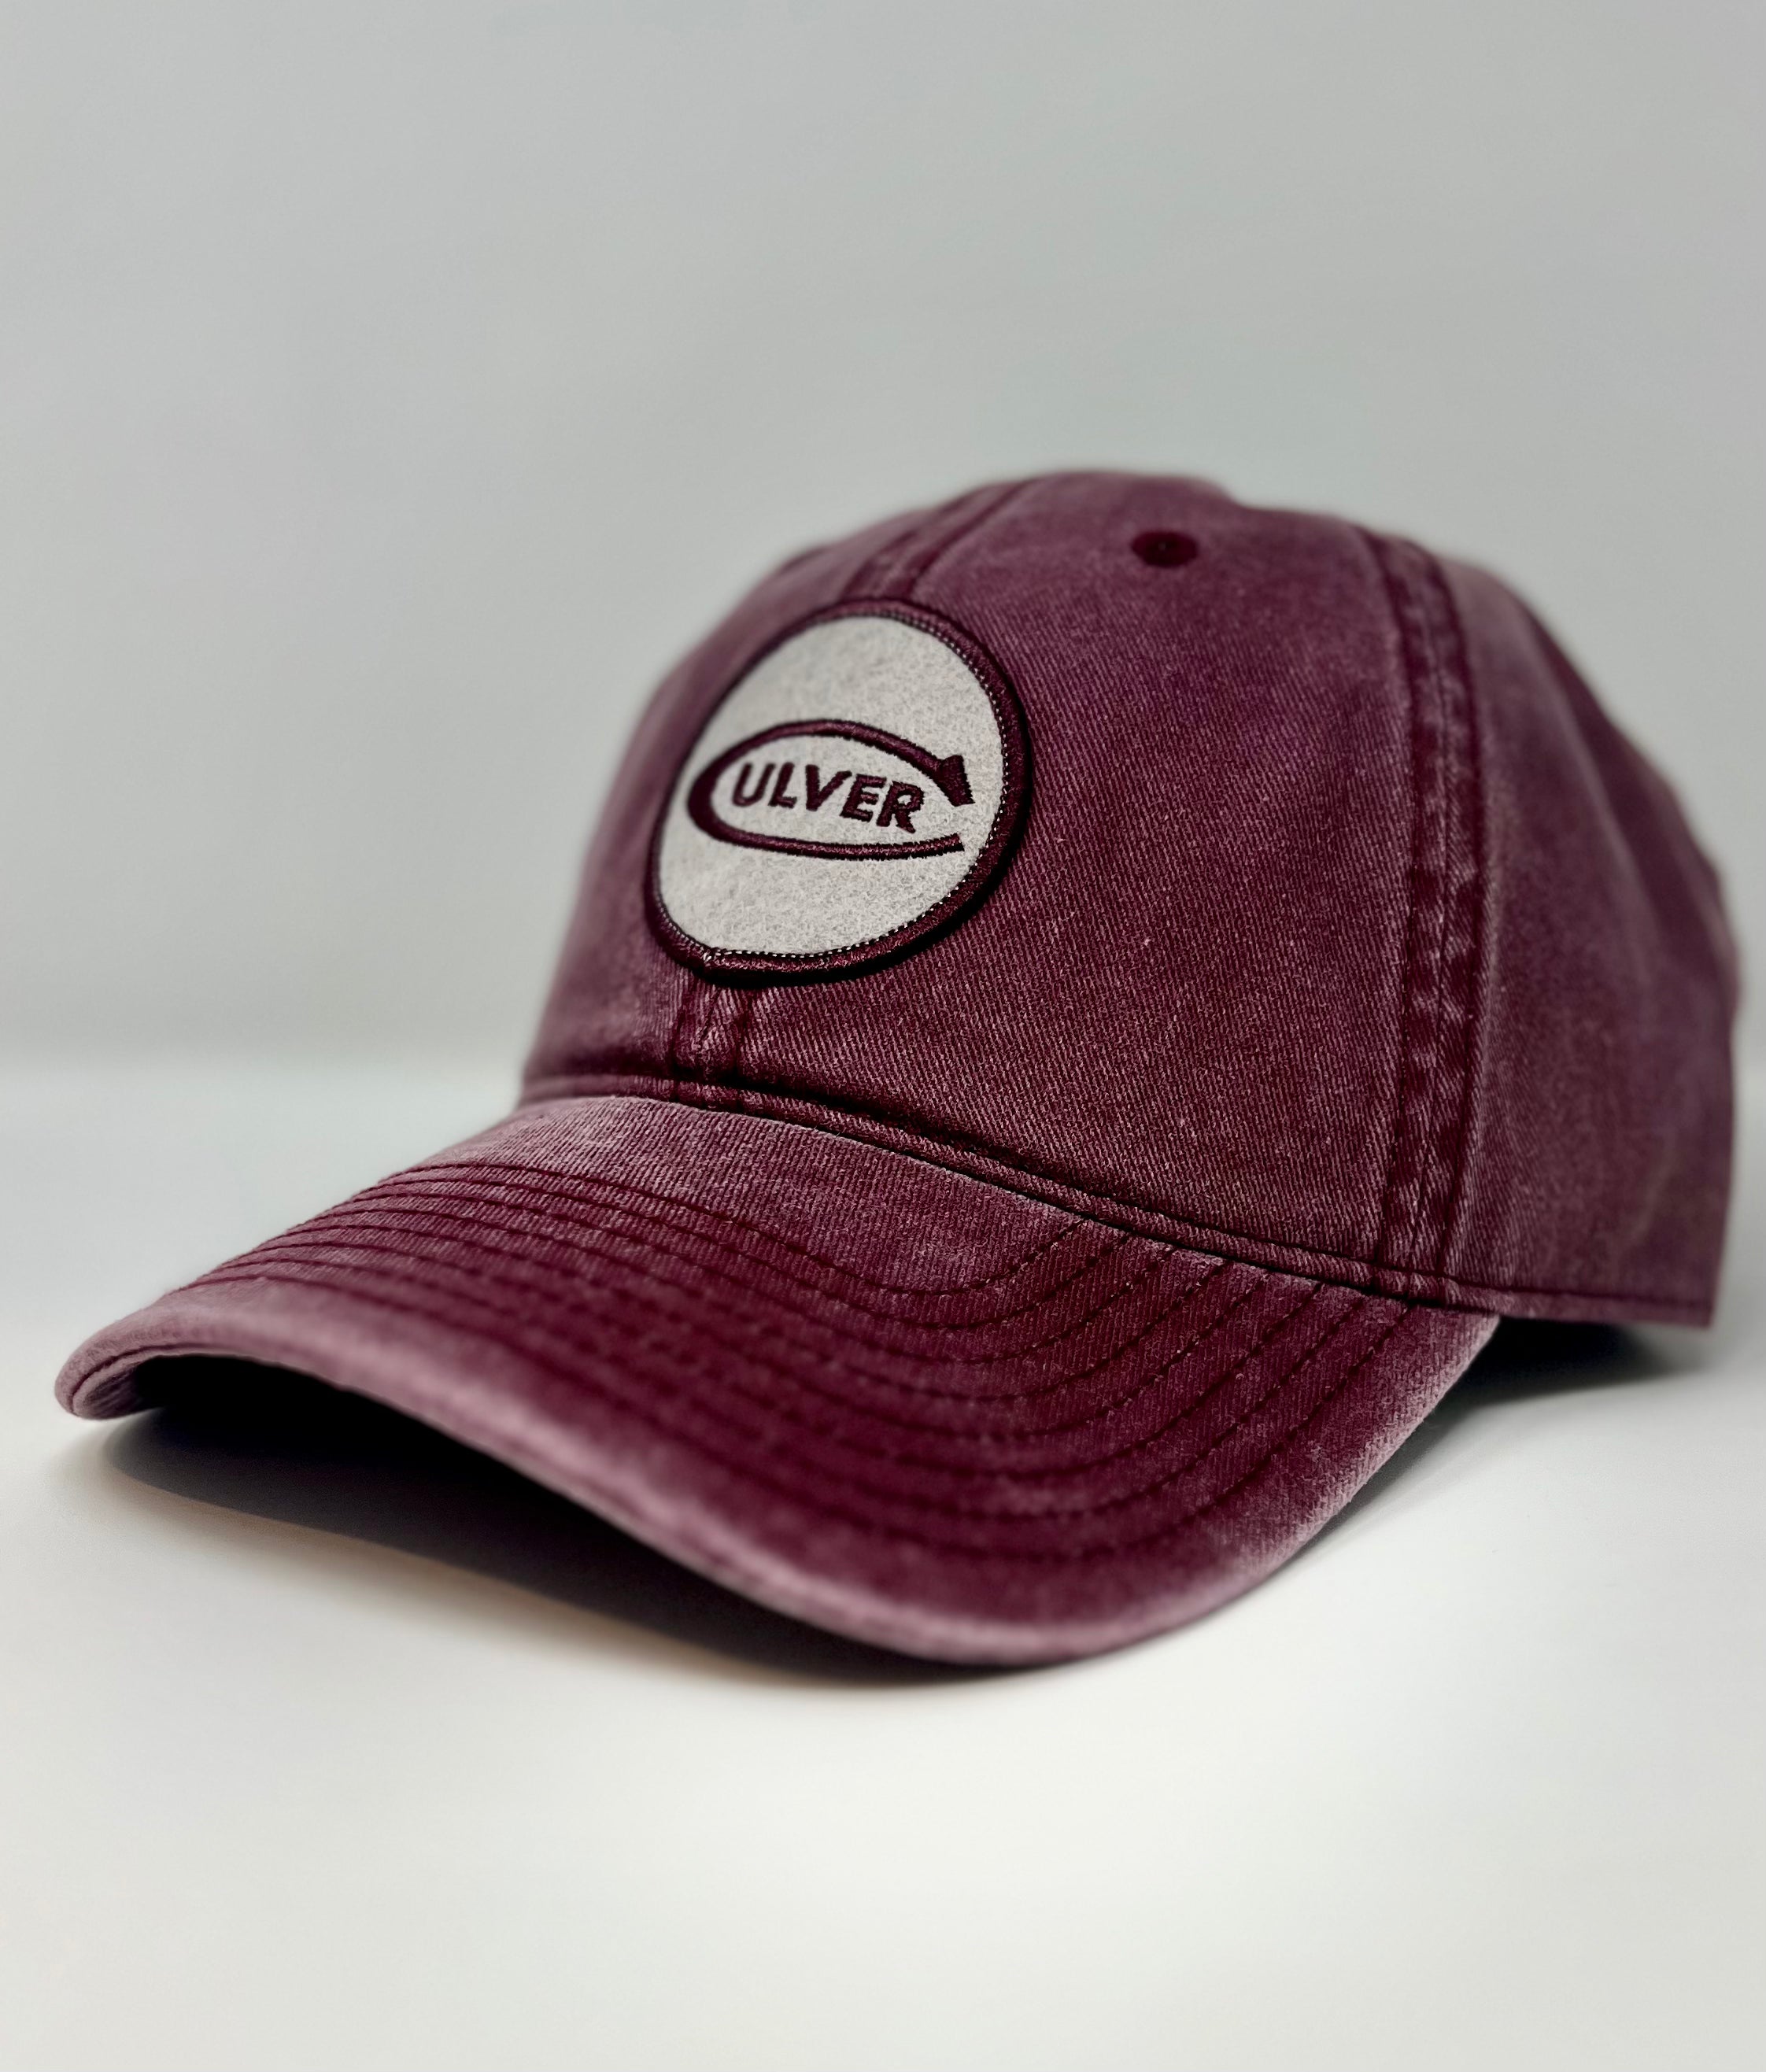 Culver Patch Pigment Dyed Twill Hat - Washed Maroon